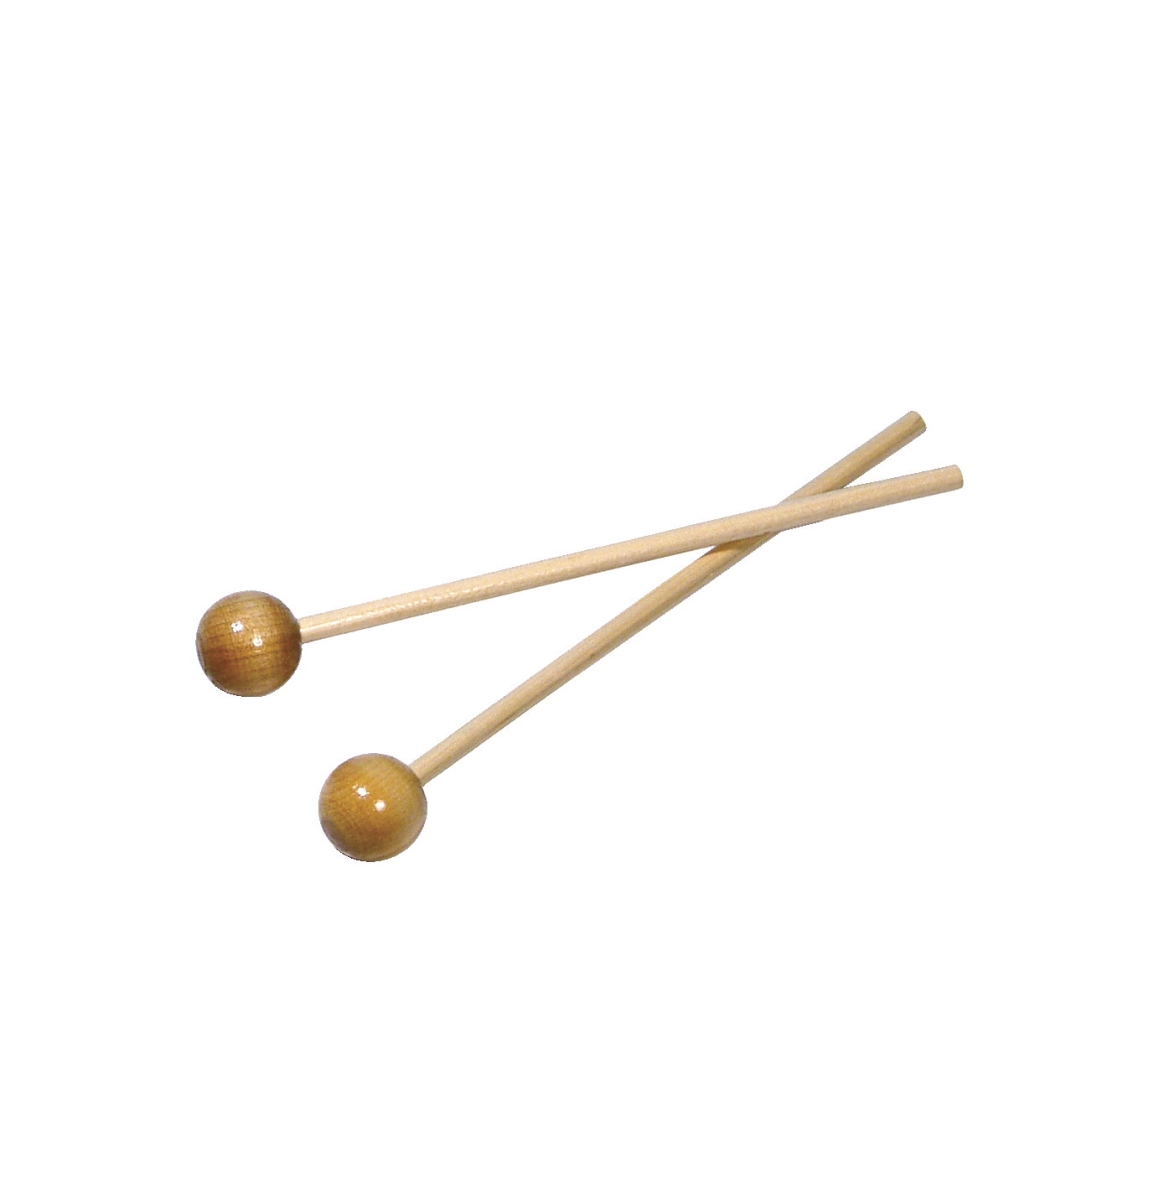 131-5307 Wooden Mallets - Pack Of 2